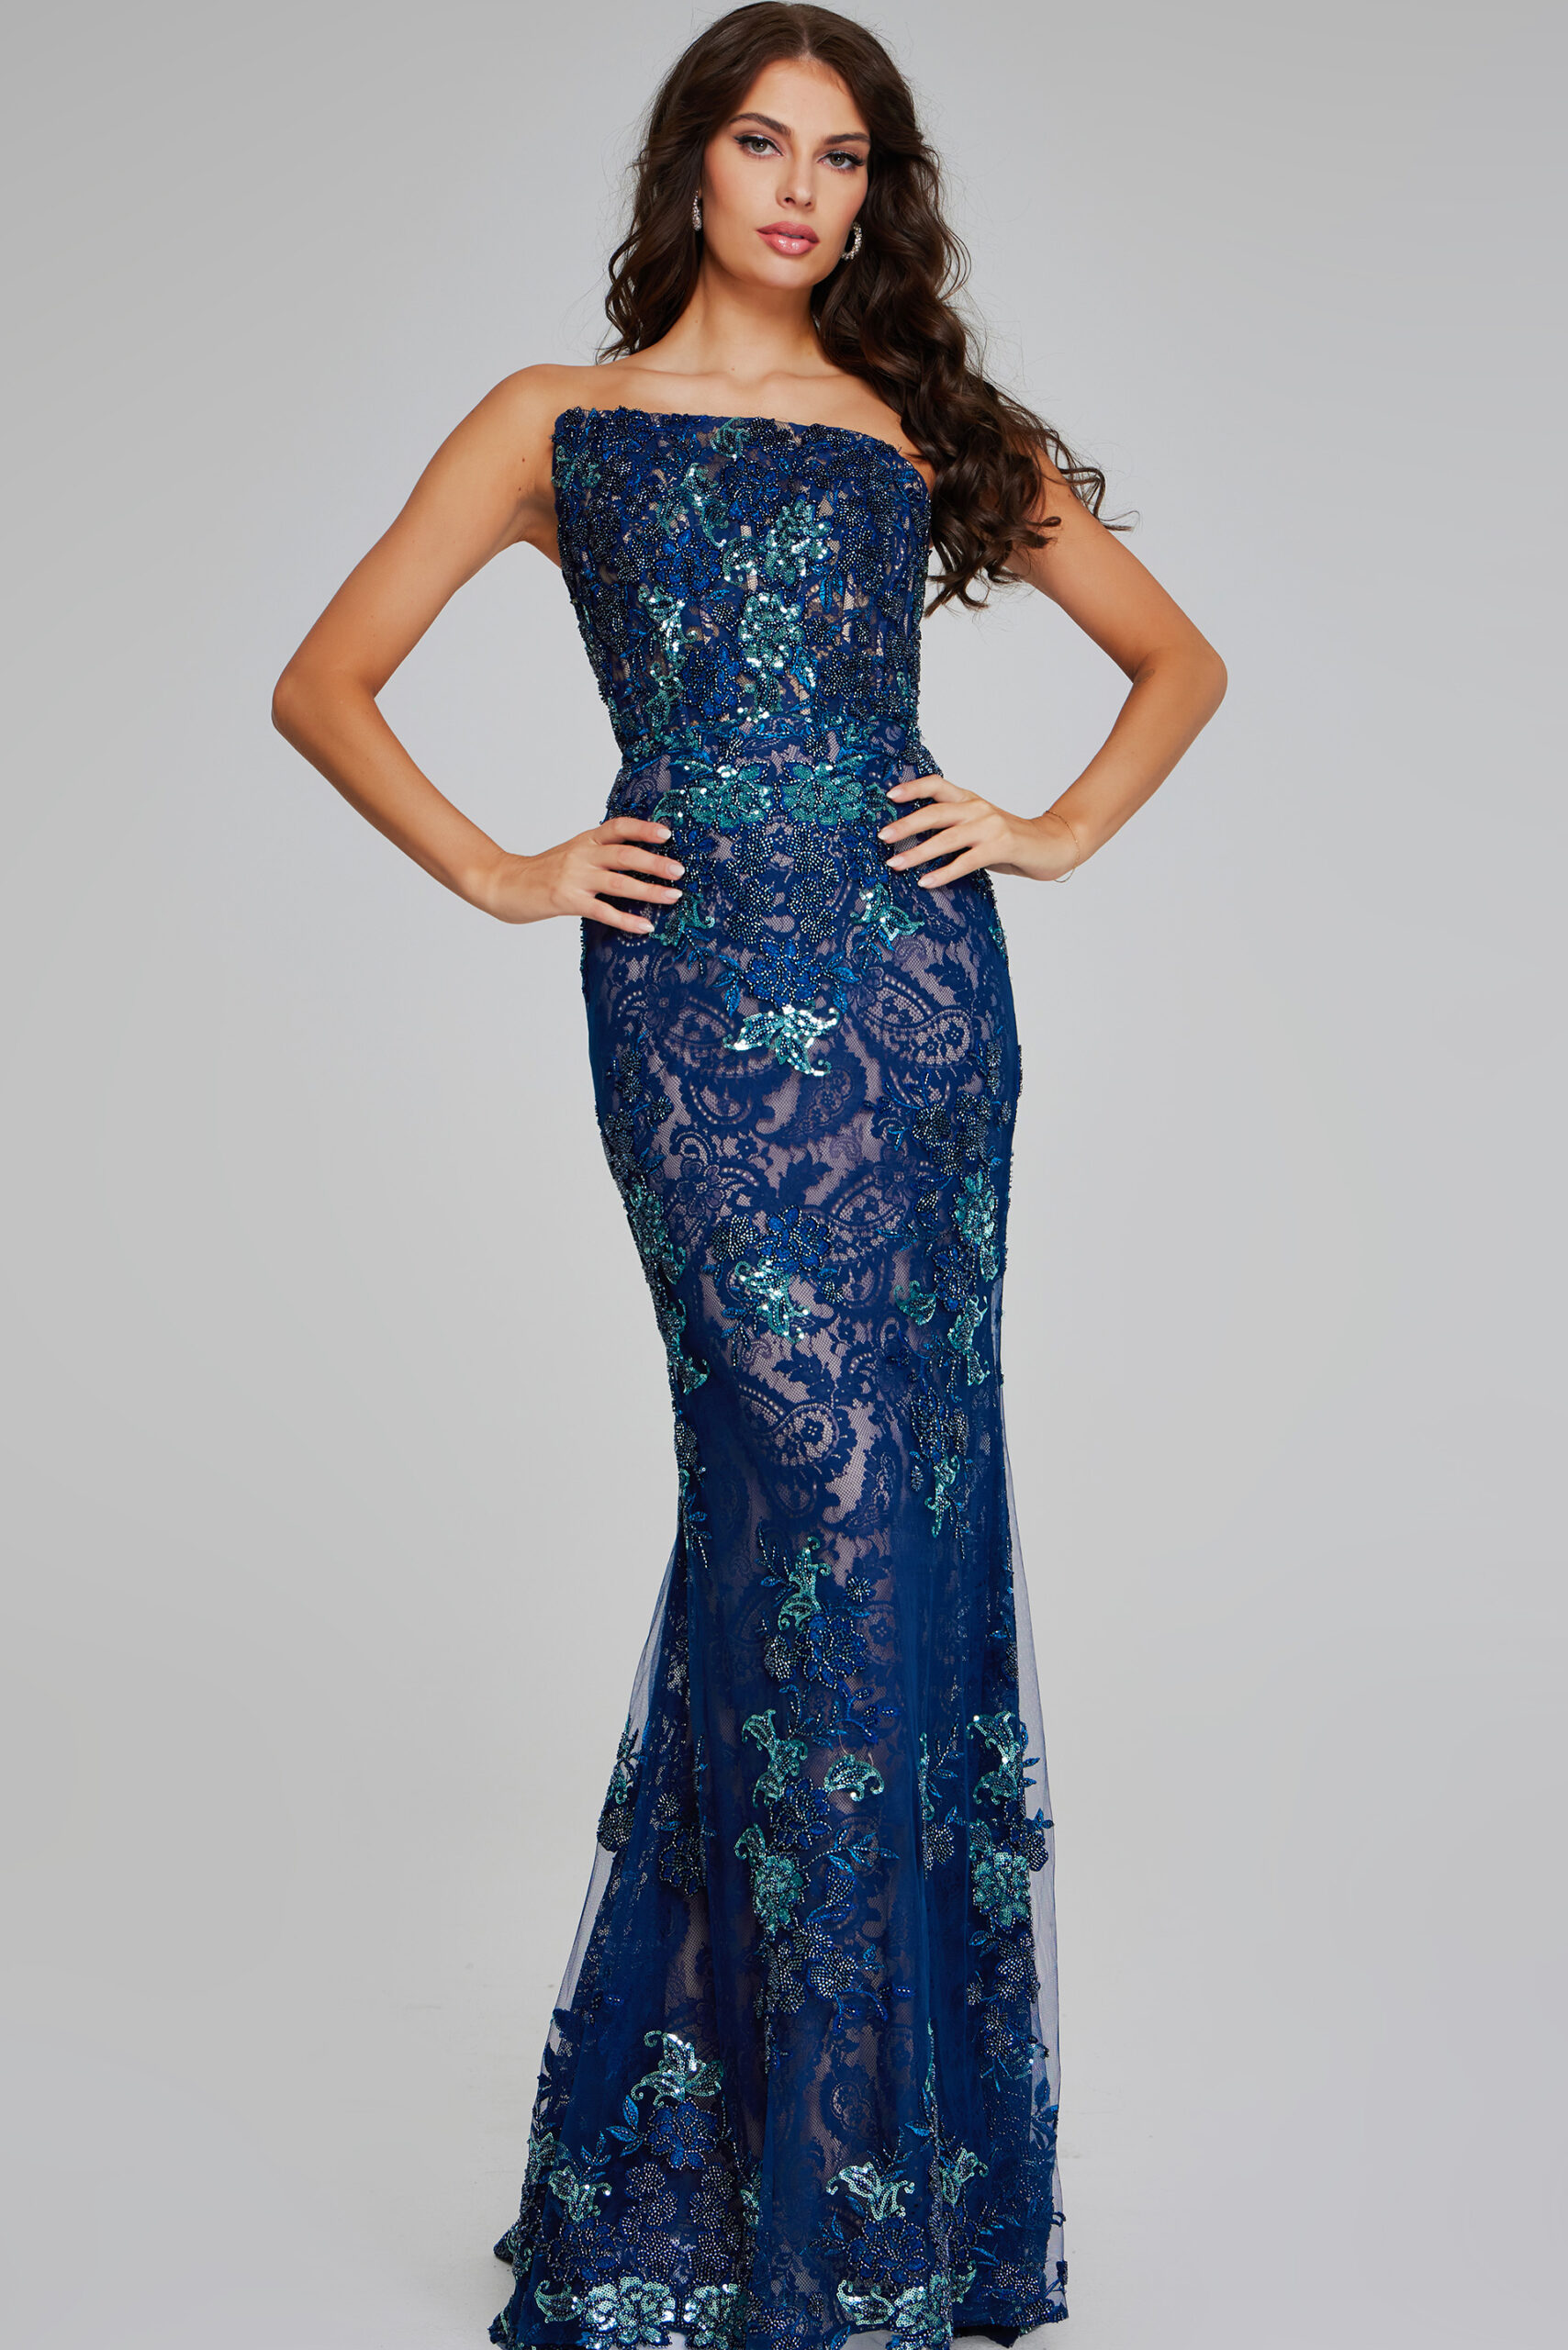 Elegant Navy Strapless Lace Gown 40847